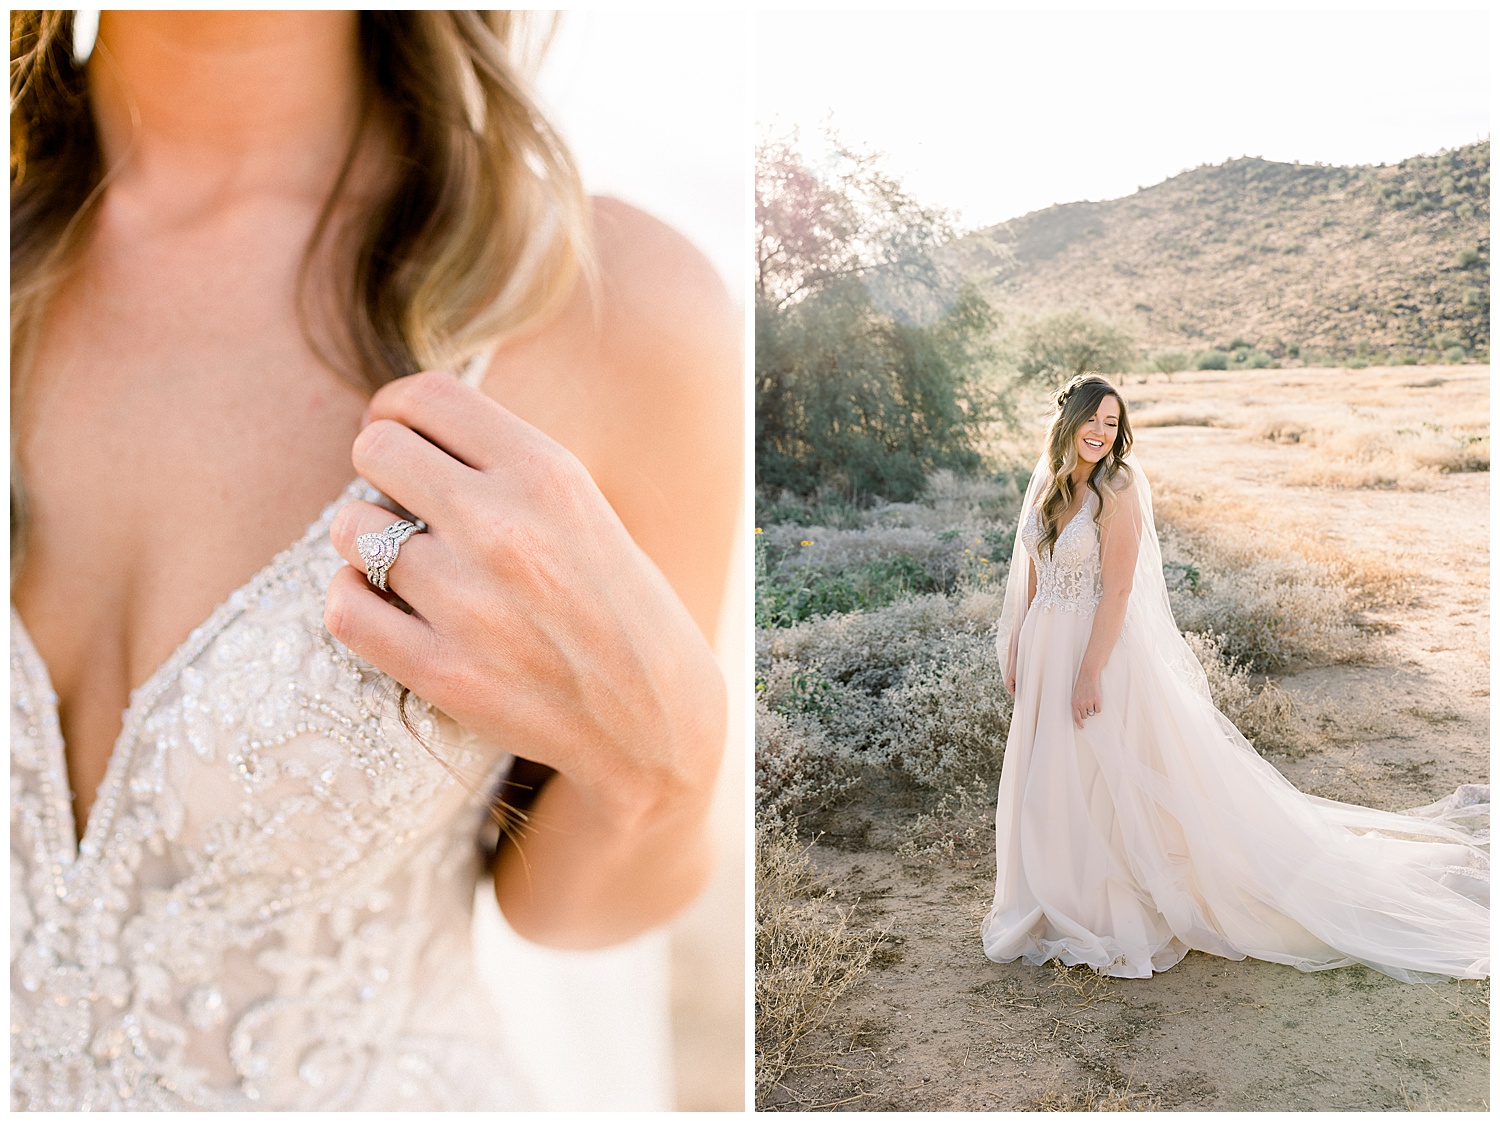 Bodice and Ring of bride during intimate desert estate wedding